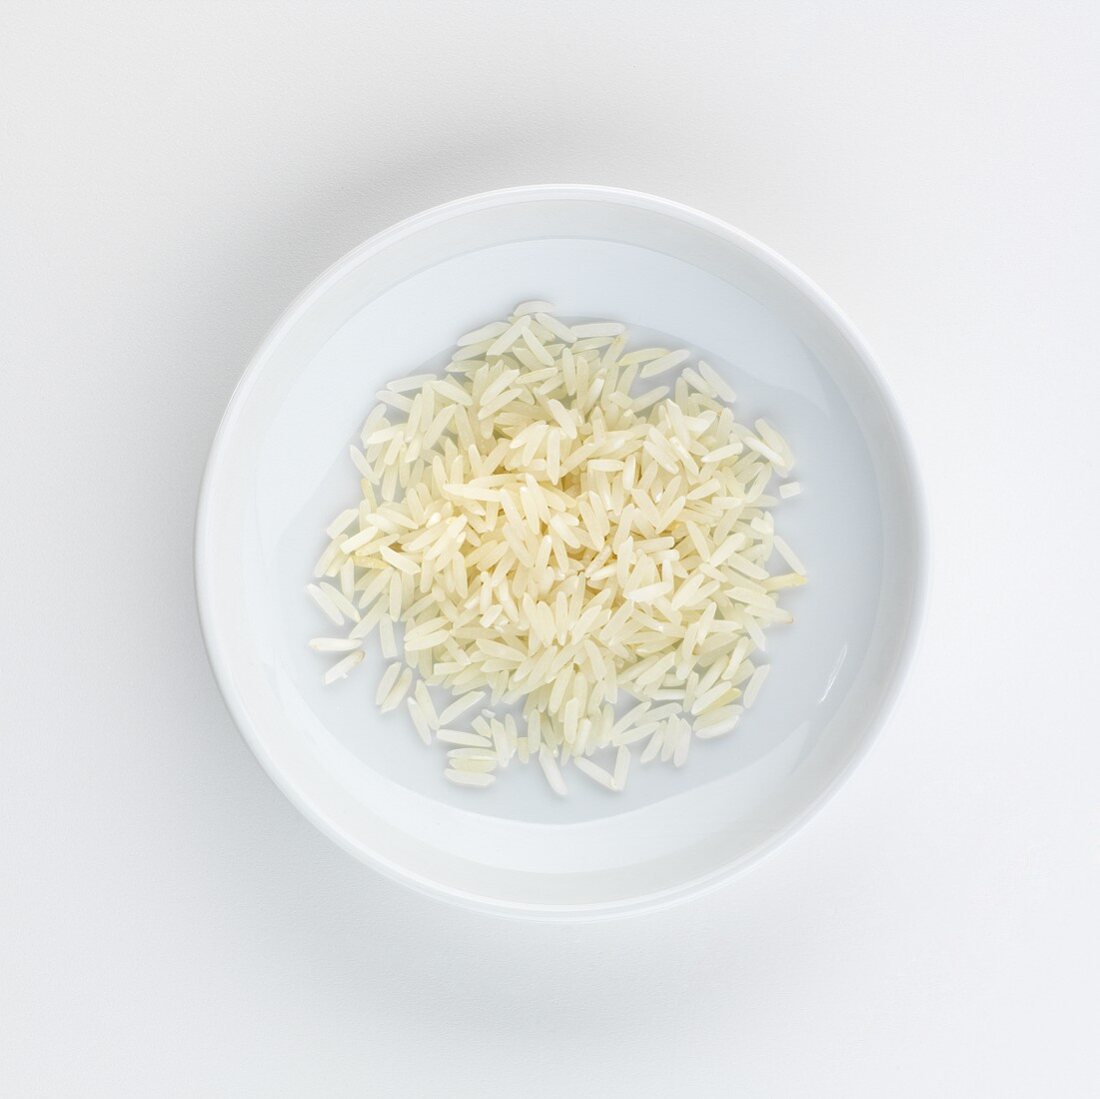 A plate of basmarti rice, seen from above